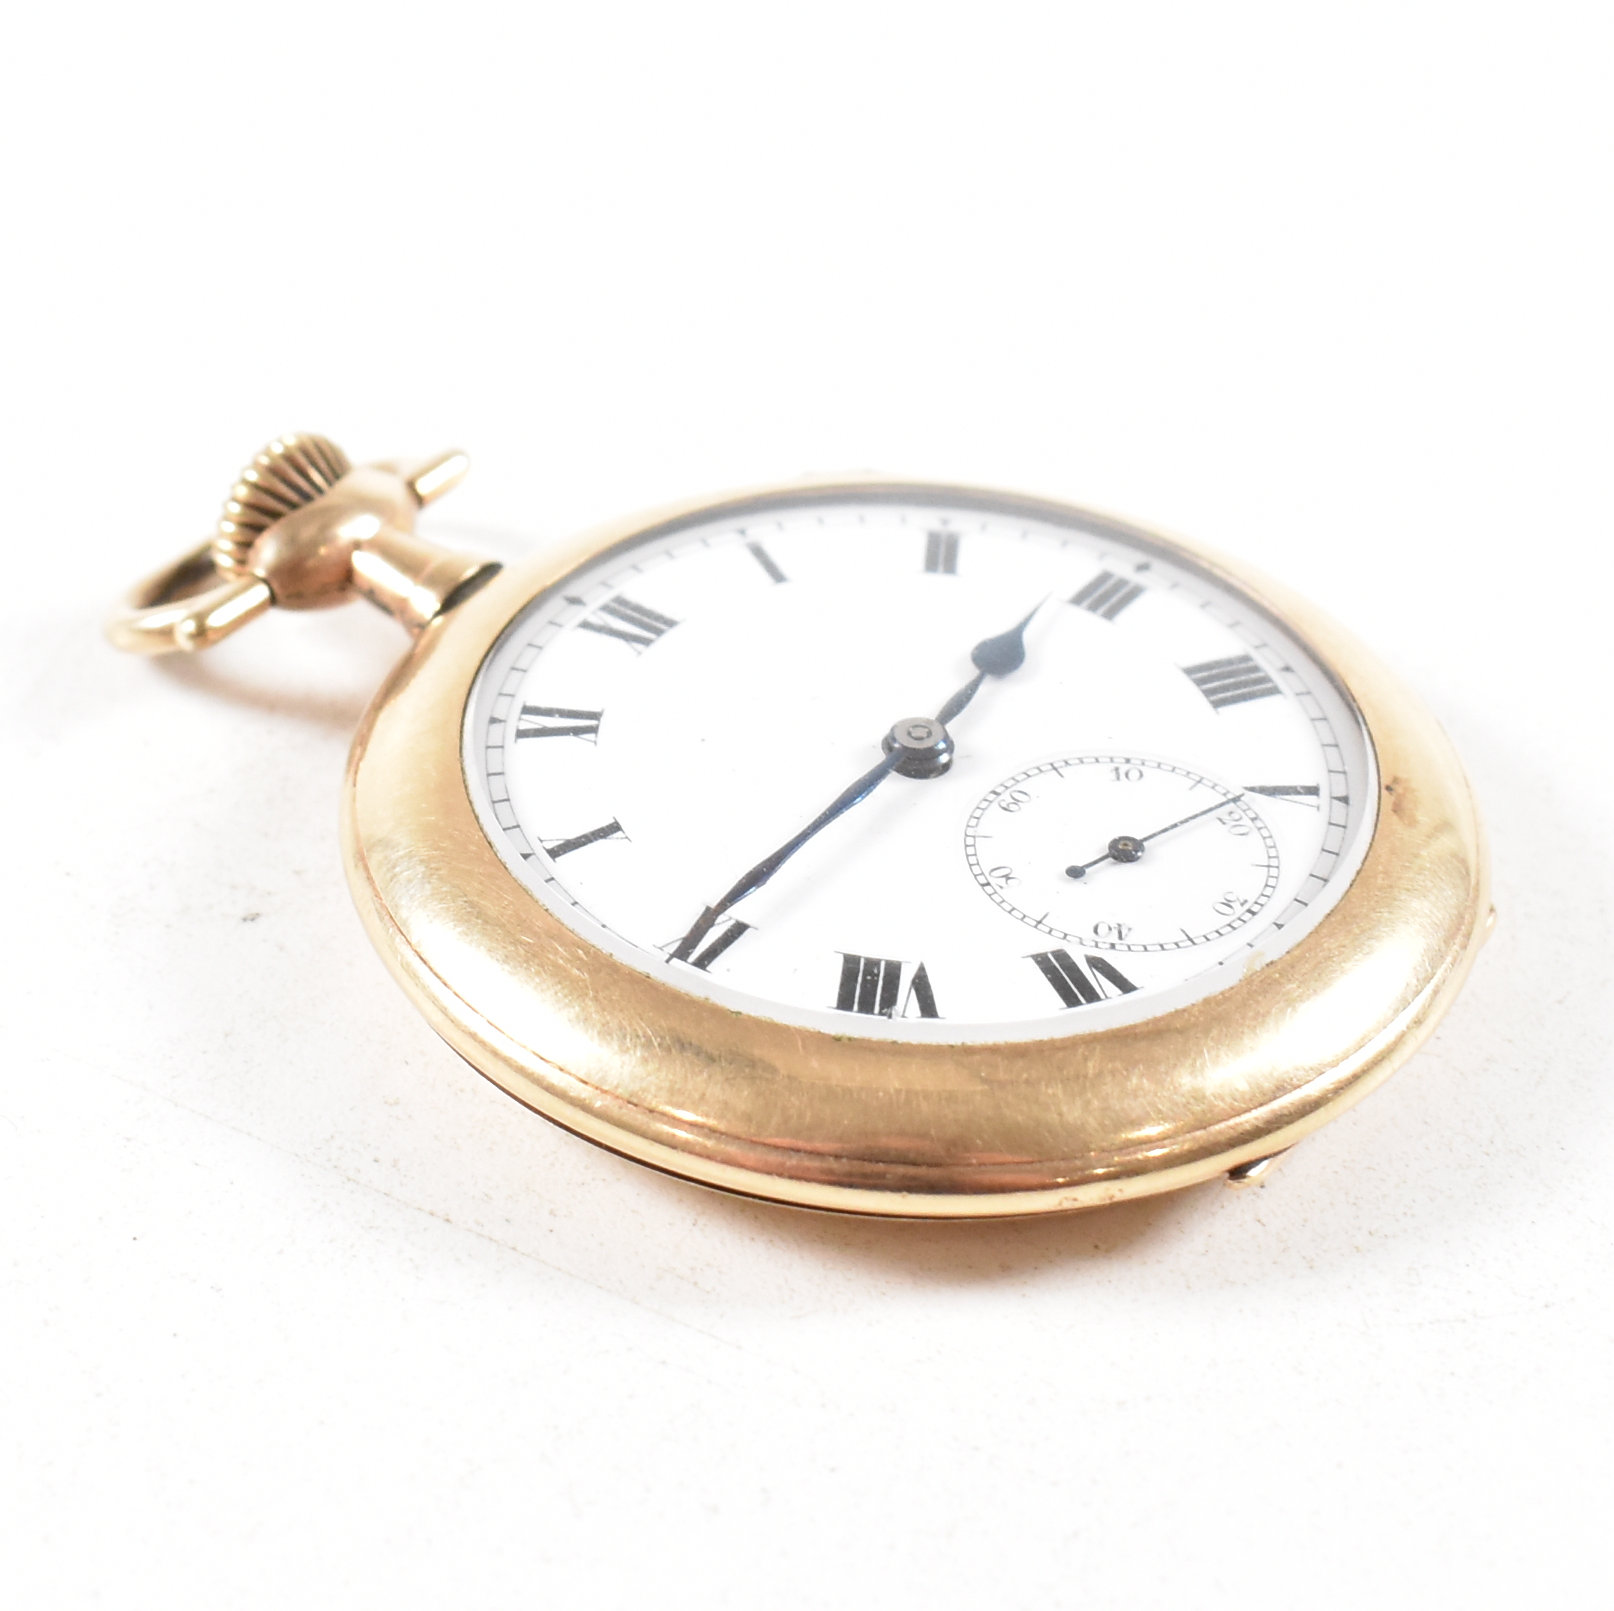 ROLEX LEVER SWISS MADE YELLOW METAL POCKET WATCH - Image 3 of 7